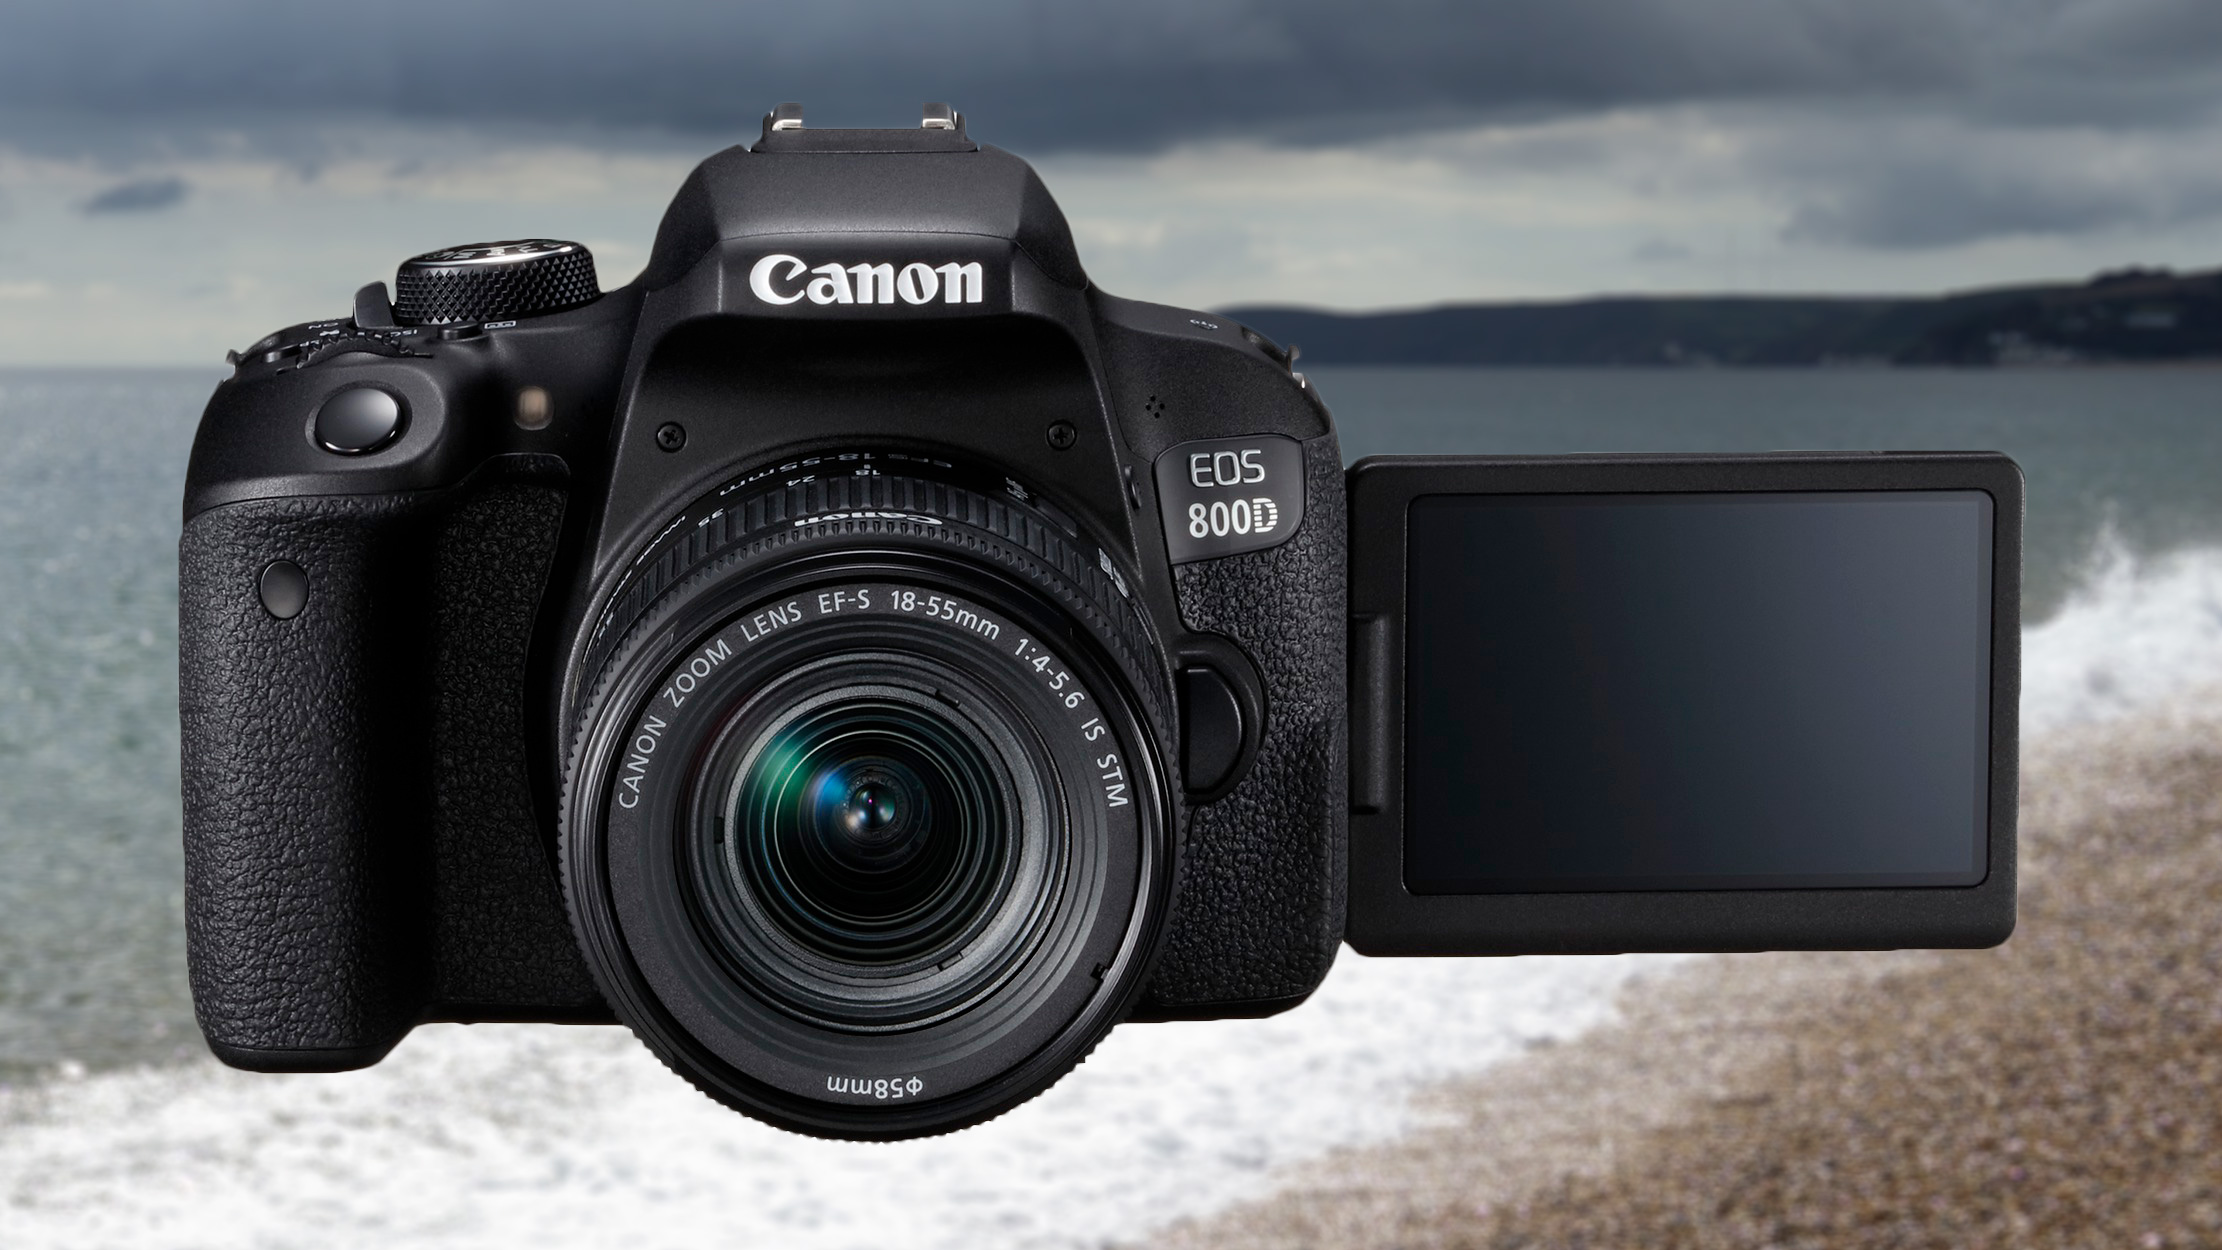 Versterker piano Afname Canon EOS 800D/Rebel T7i review | Digital Camera World